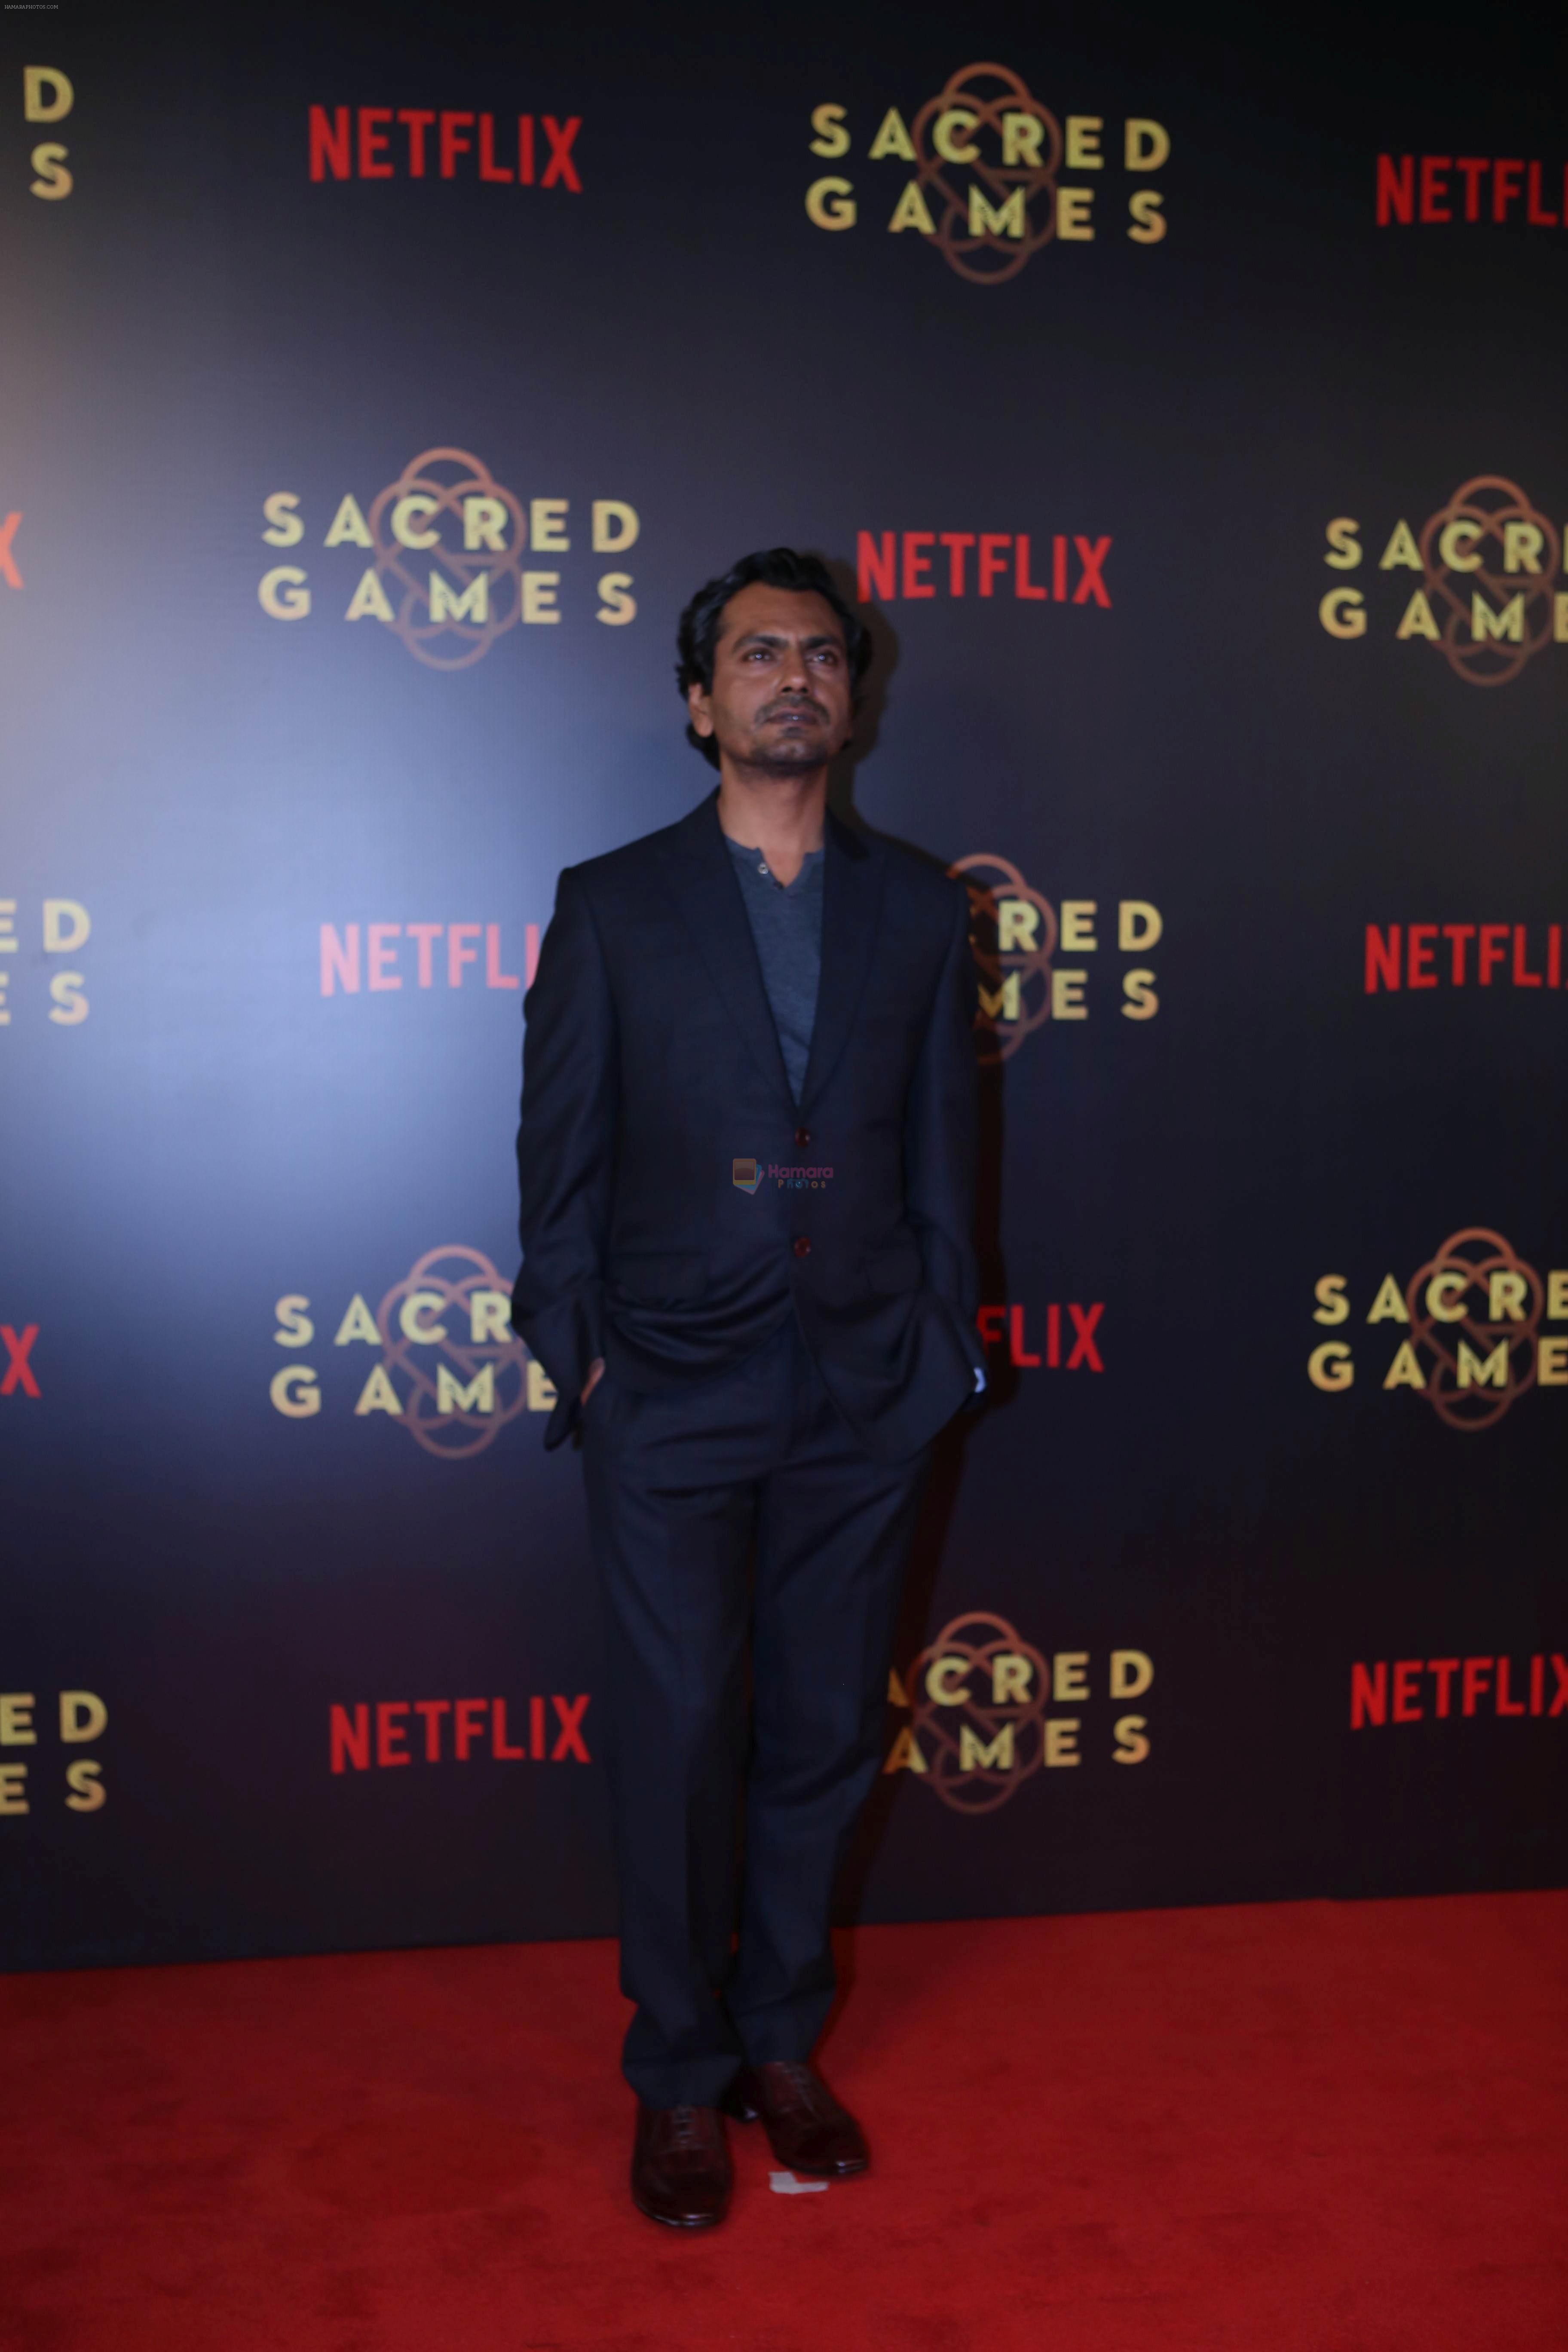 Nawazuddin Siddiqui at the Screening of Netflix Sacred Games in pvr icon Andheri on 28th June 2018